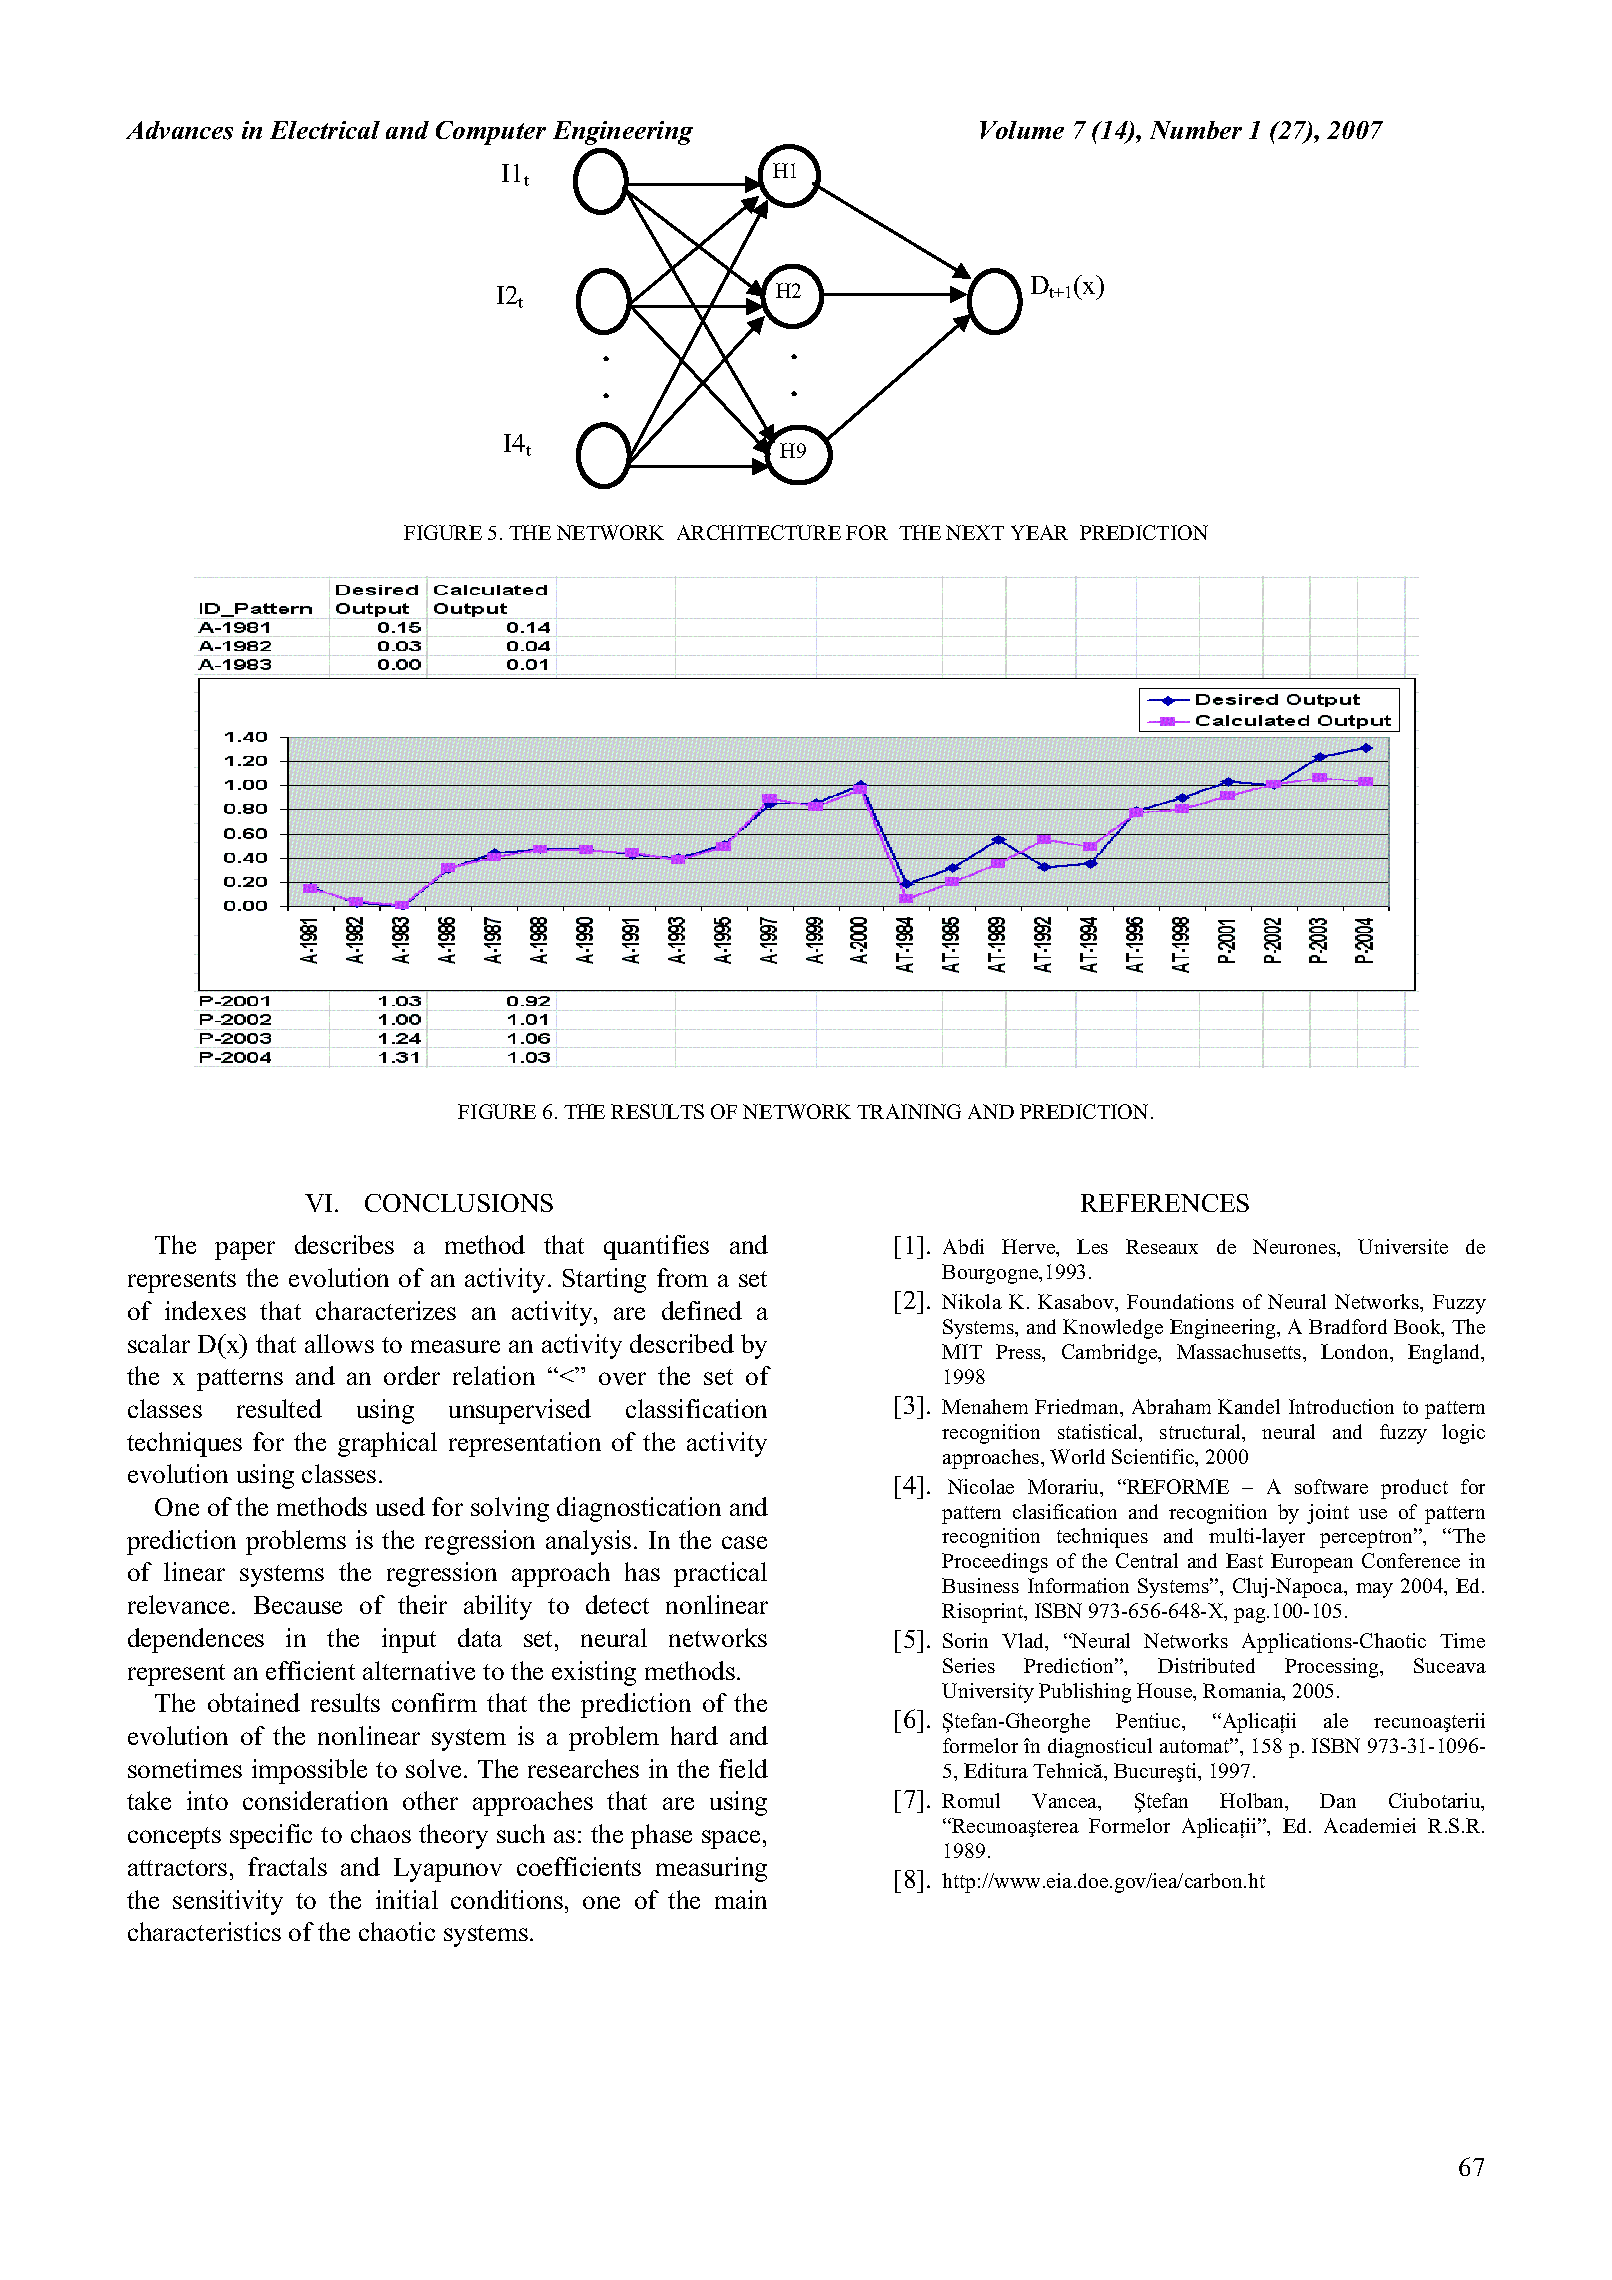 PDF Quickview for paper with DOI:10.4316/AECE.2007.01014